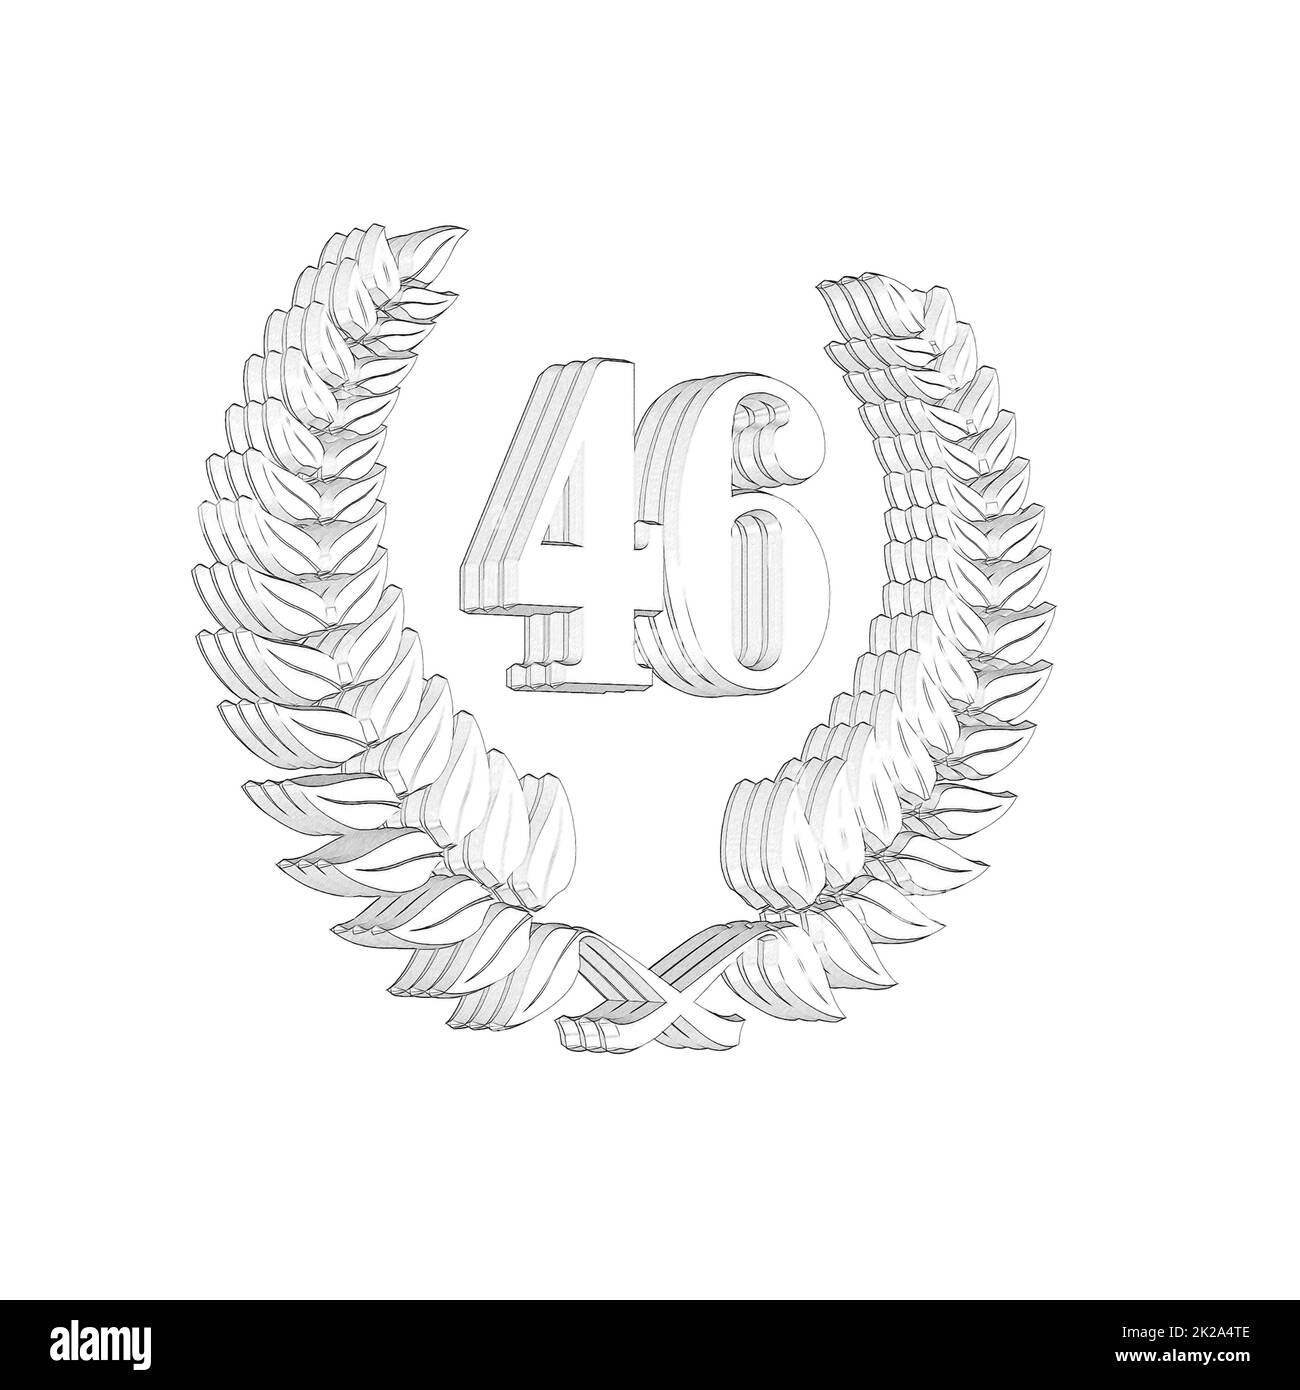 Number 46 with laurel wreath or honor wreath as a 3D-illustration, 3D-rendering Stock Photo